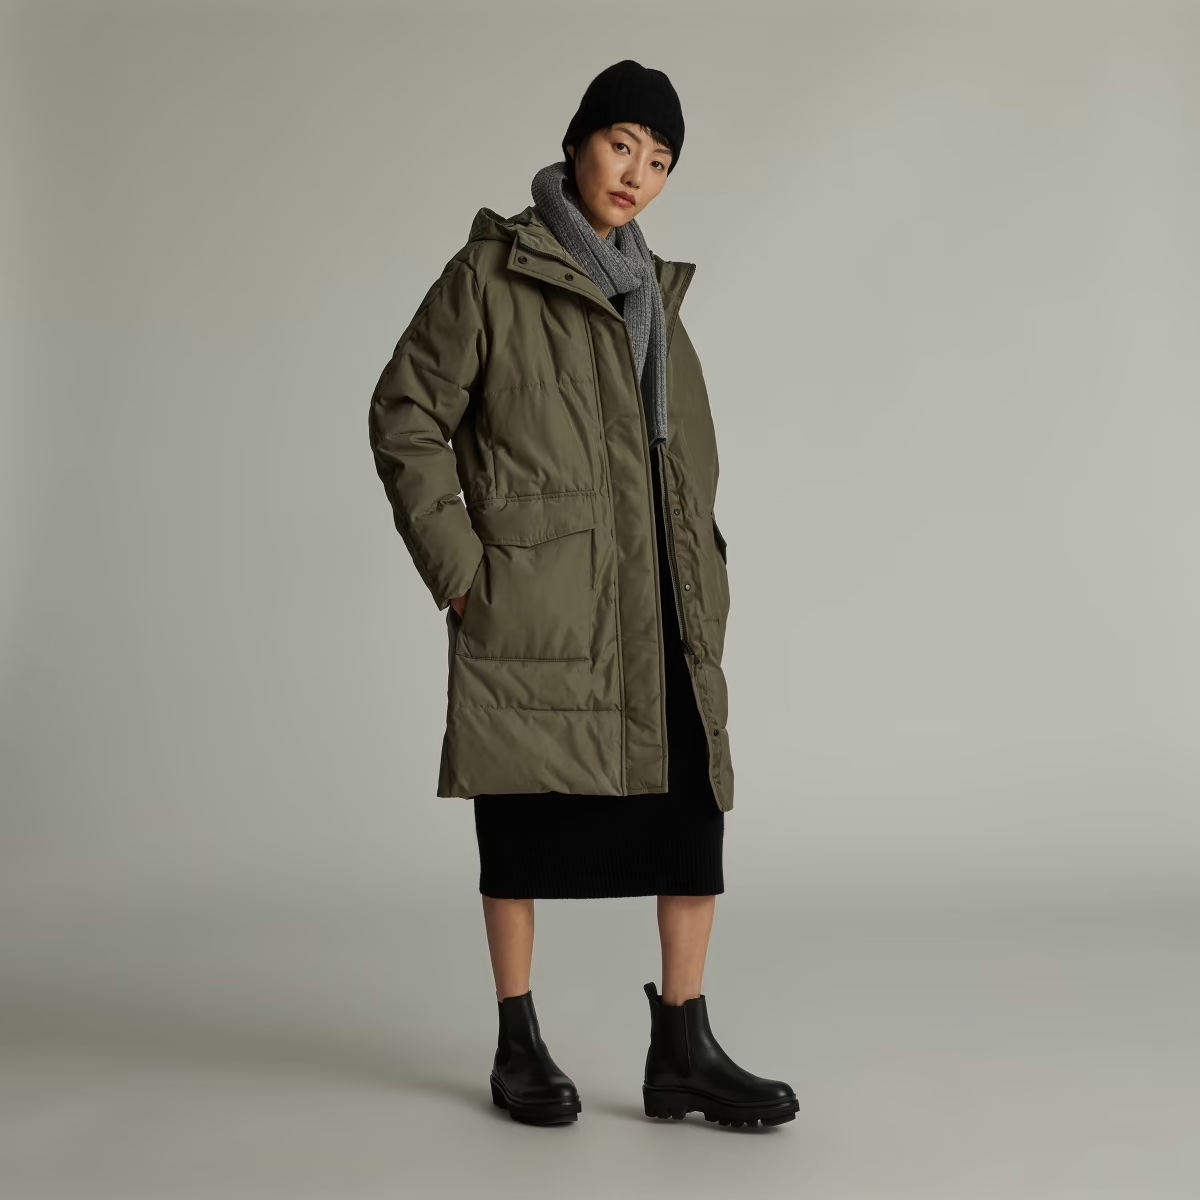 Everlane The ReNew Long Puffer coat for extreme cold